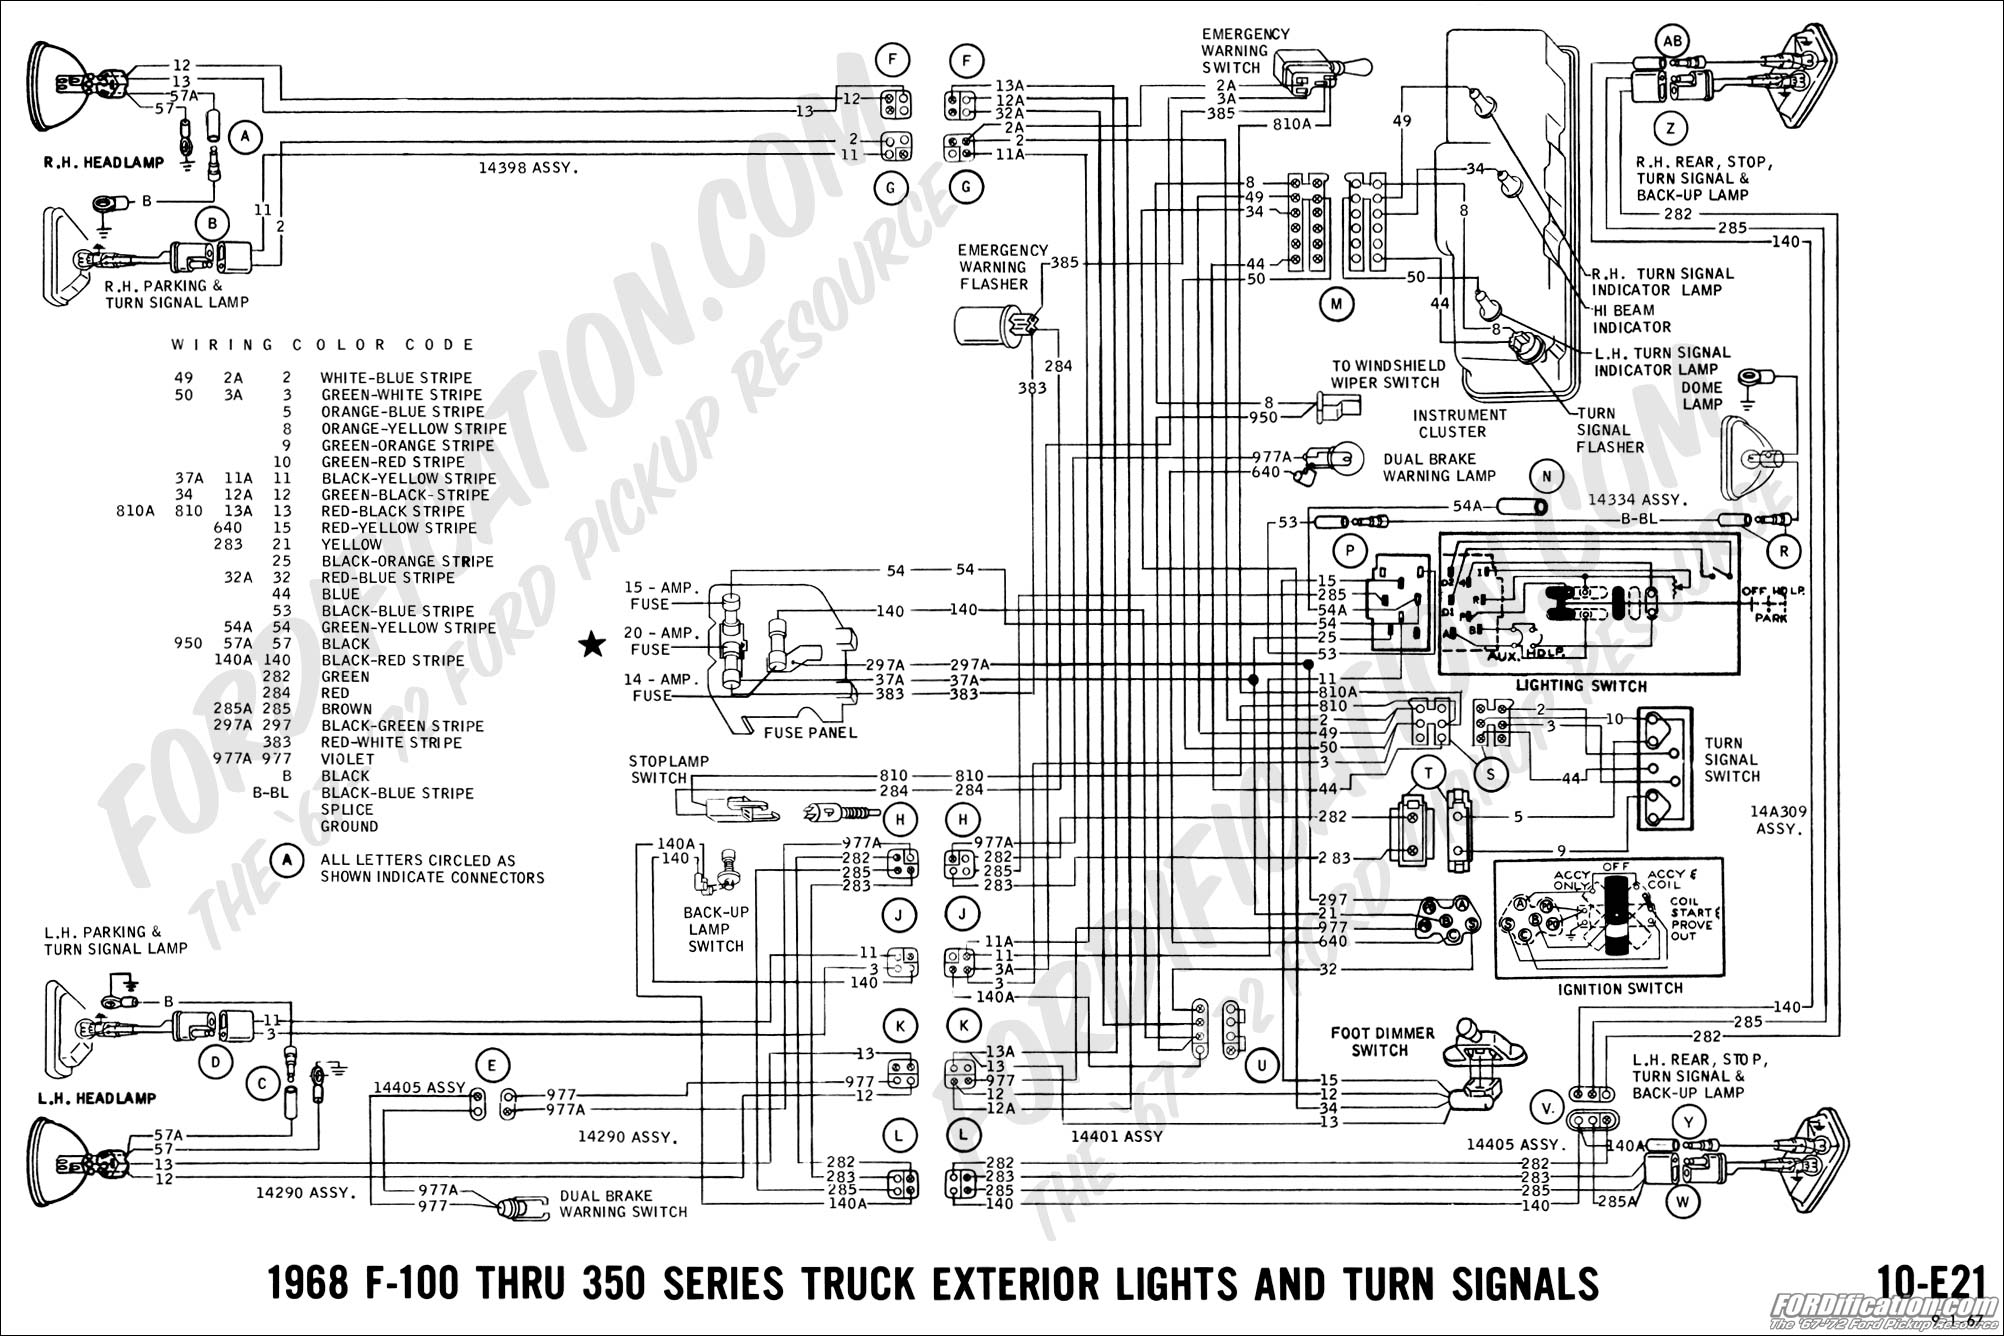 Wiring Diagram For A 1970 Ford F250 Ignition Switch from www.fordification.com